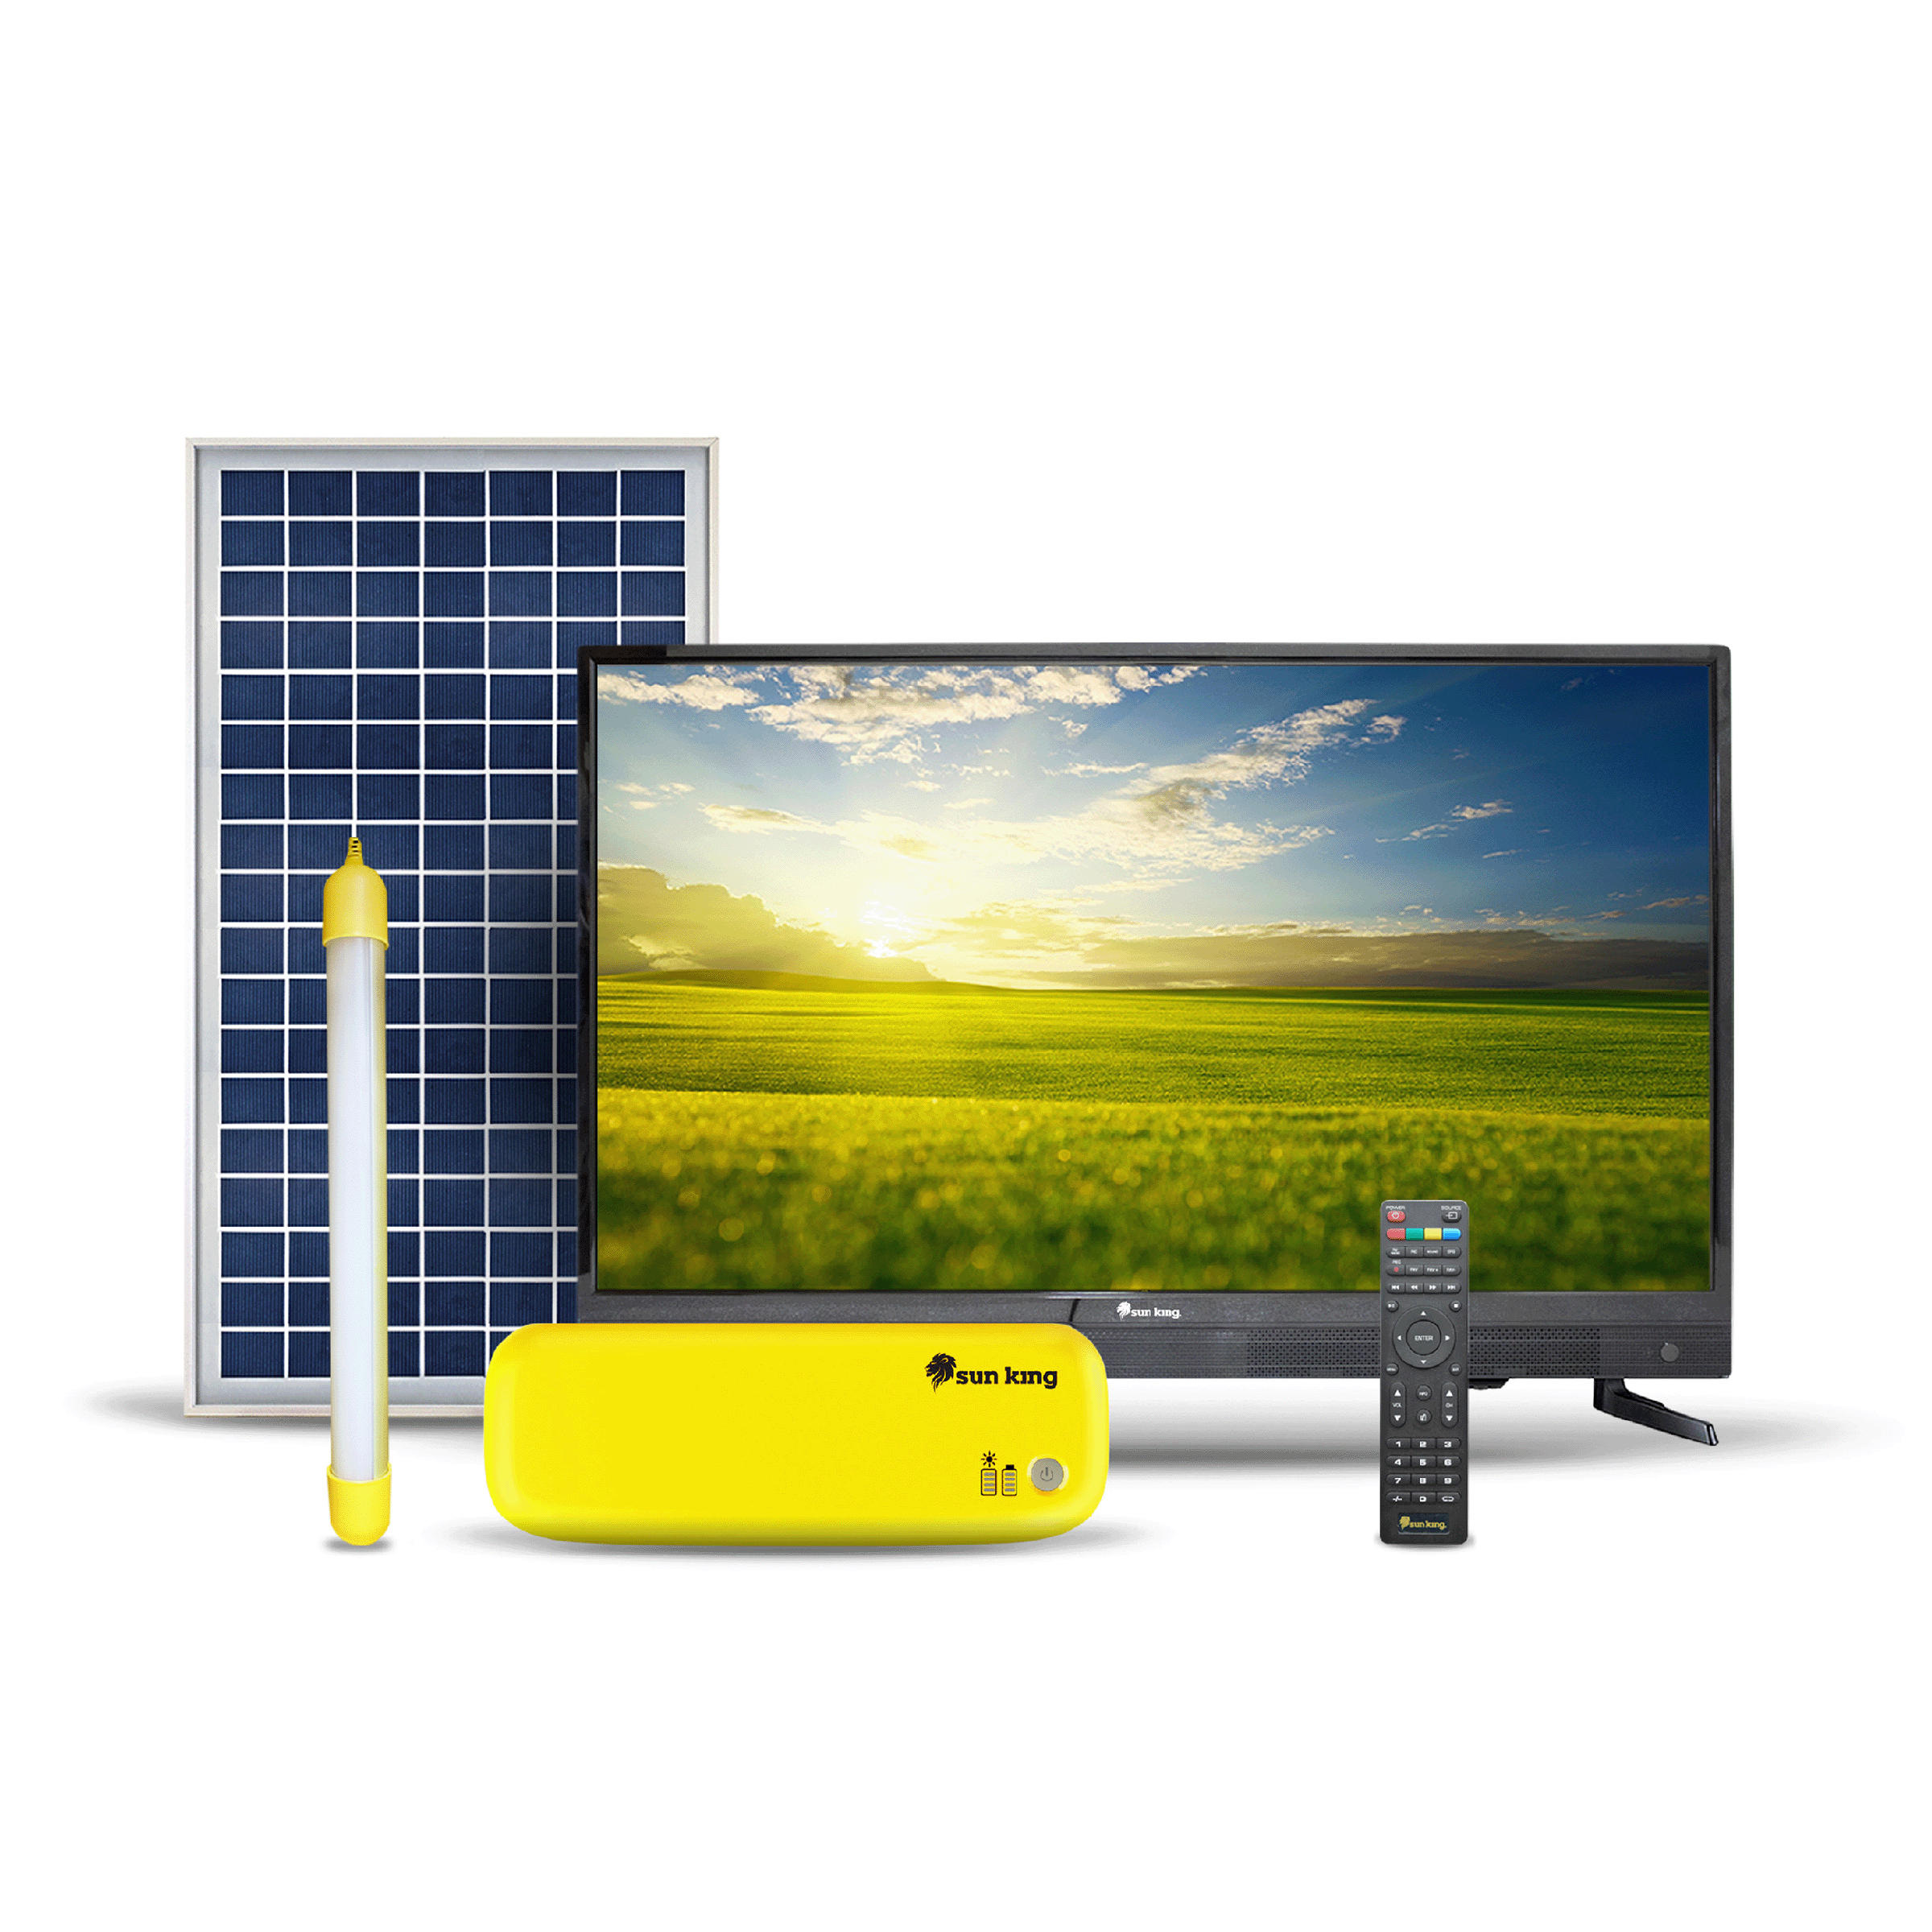 Sun King Home 250 81 cm (32 inch) HD Ready LED TV with Solar Powered Control Unit and Tubelight_1